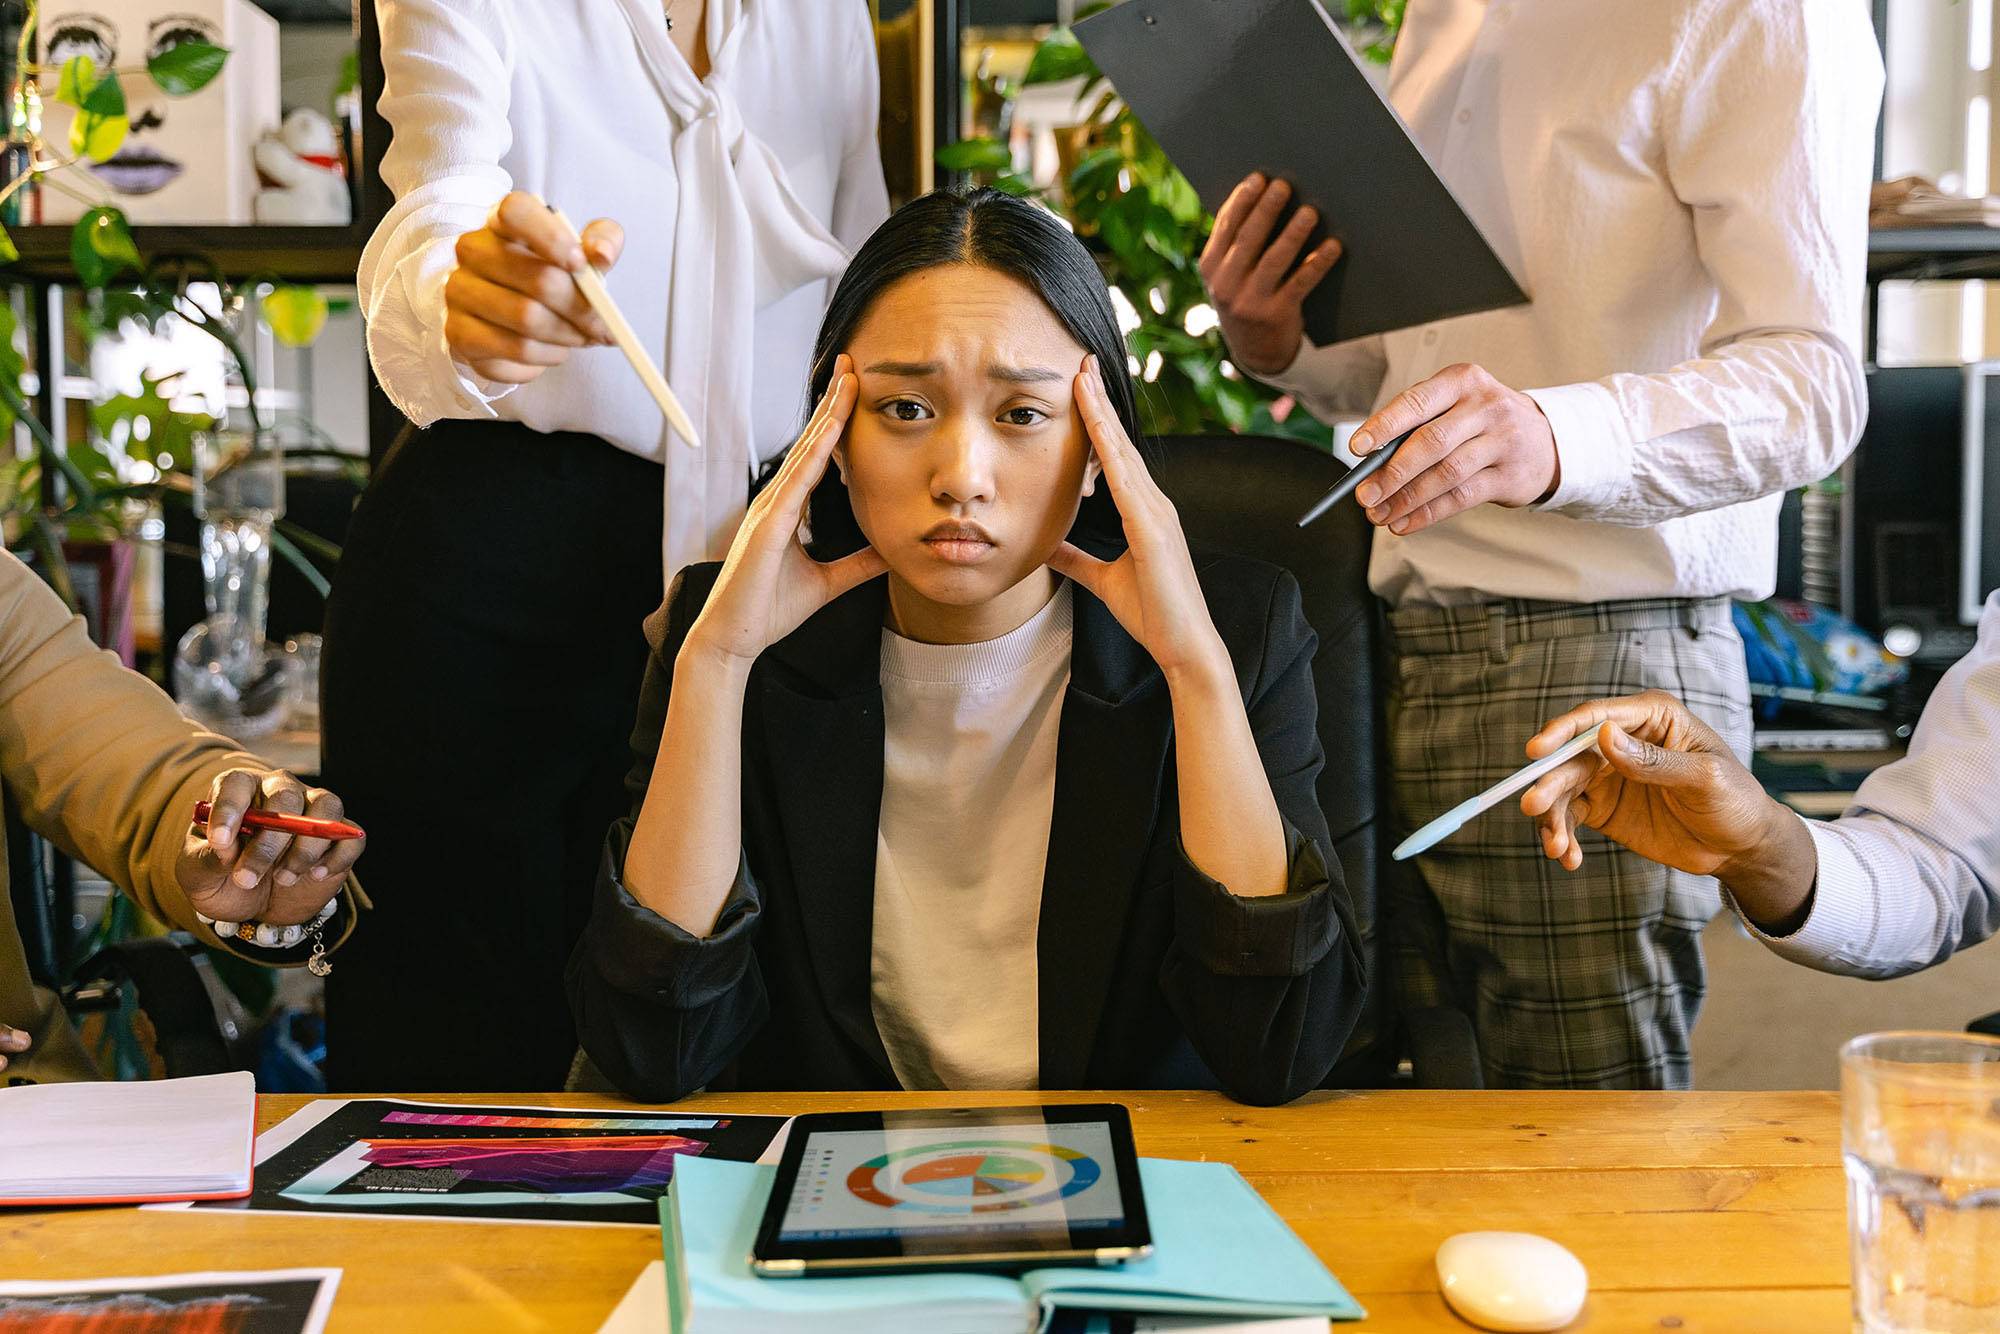 2022 tax season burnout: a finance professional surrounded by demanding people holds her head in her hands